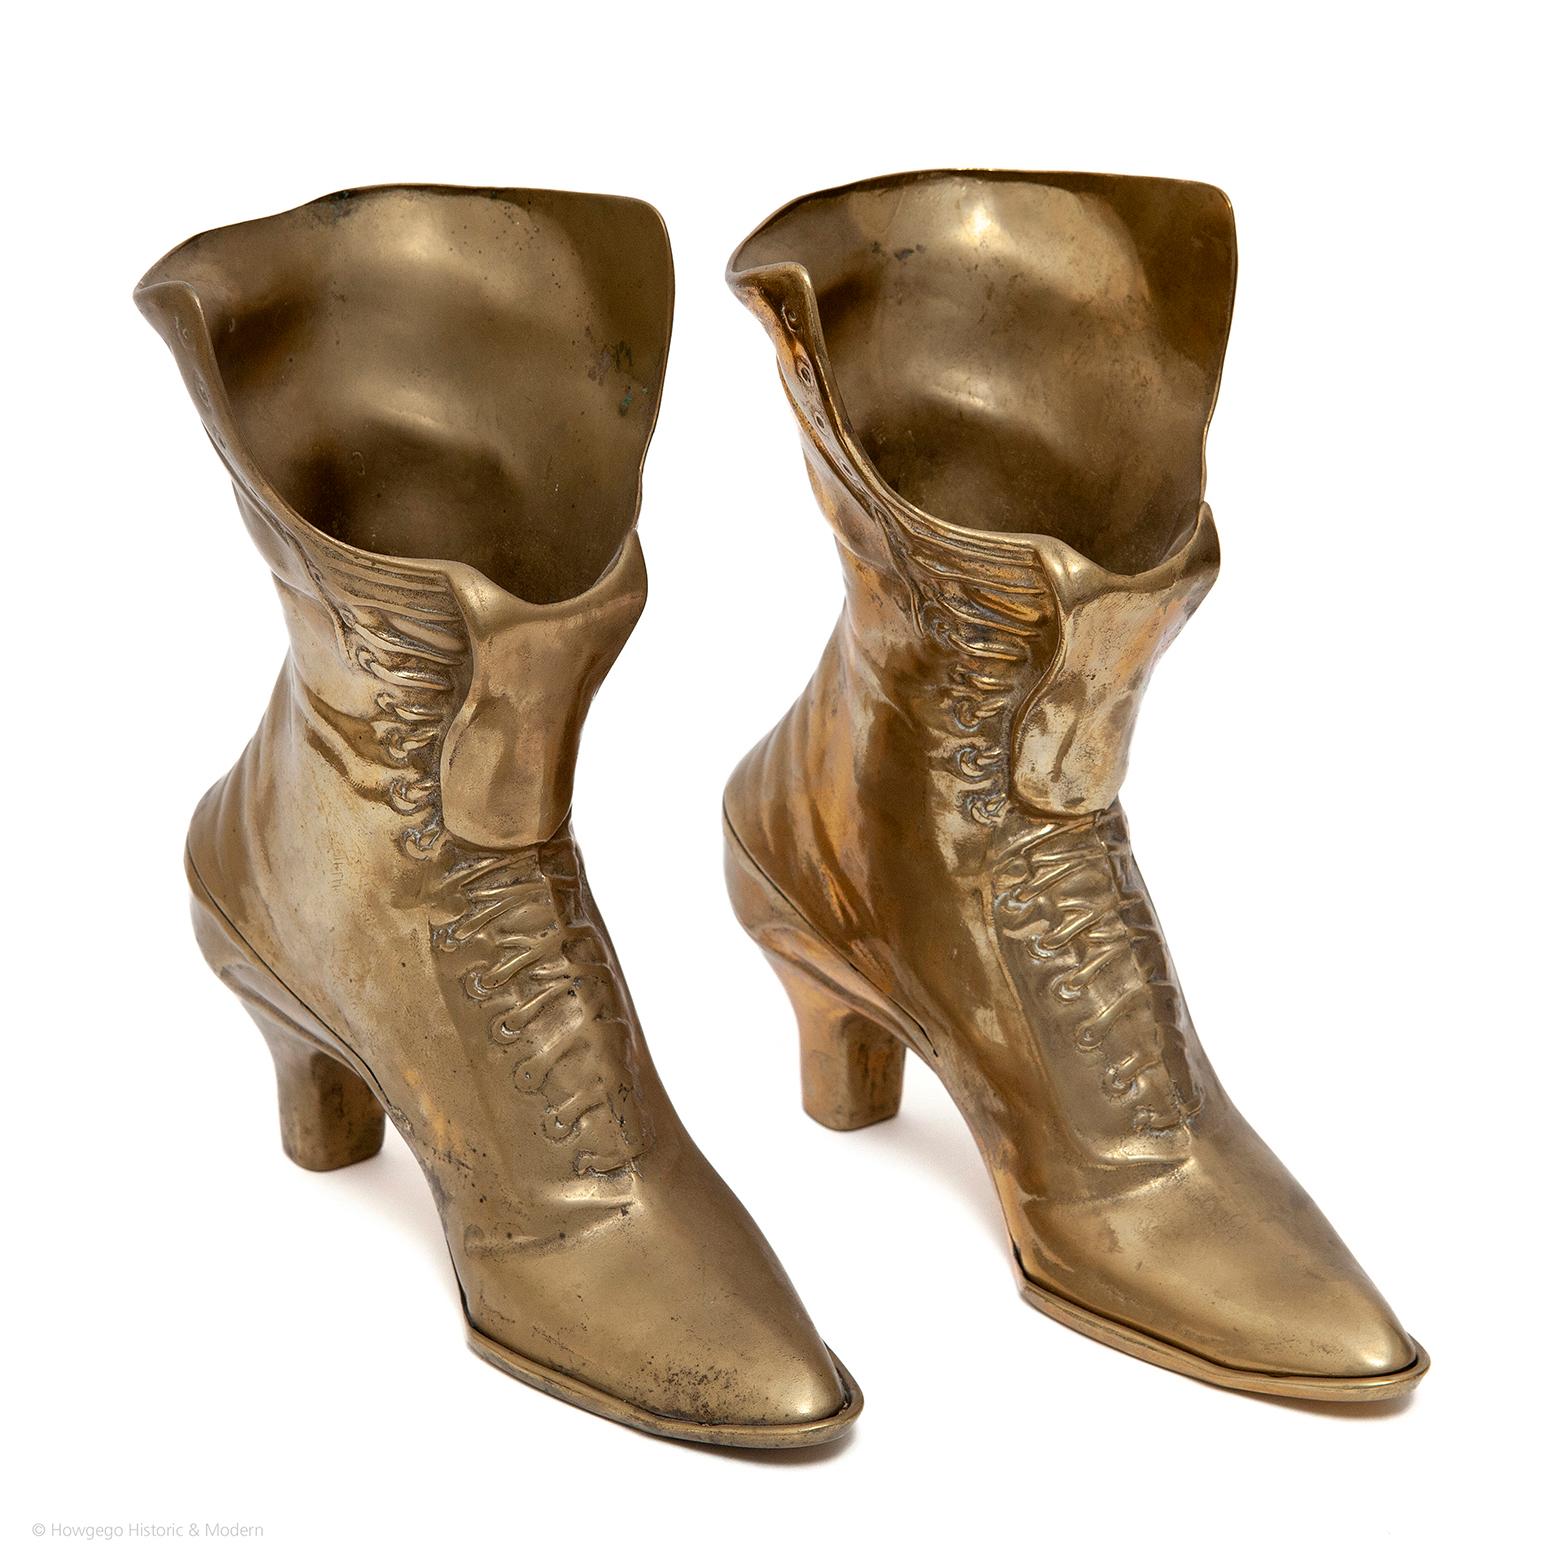 - Unusual pair of Victorian-style brass boots
- Beautifully cast
- Shoes are steeped in custom, symbolic meaning and stories; Cinderella, Dorothy. Shoes were offered as gifts on special occasions in the 17th and 18th centuries often exchanged